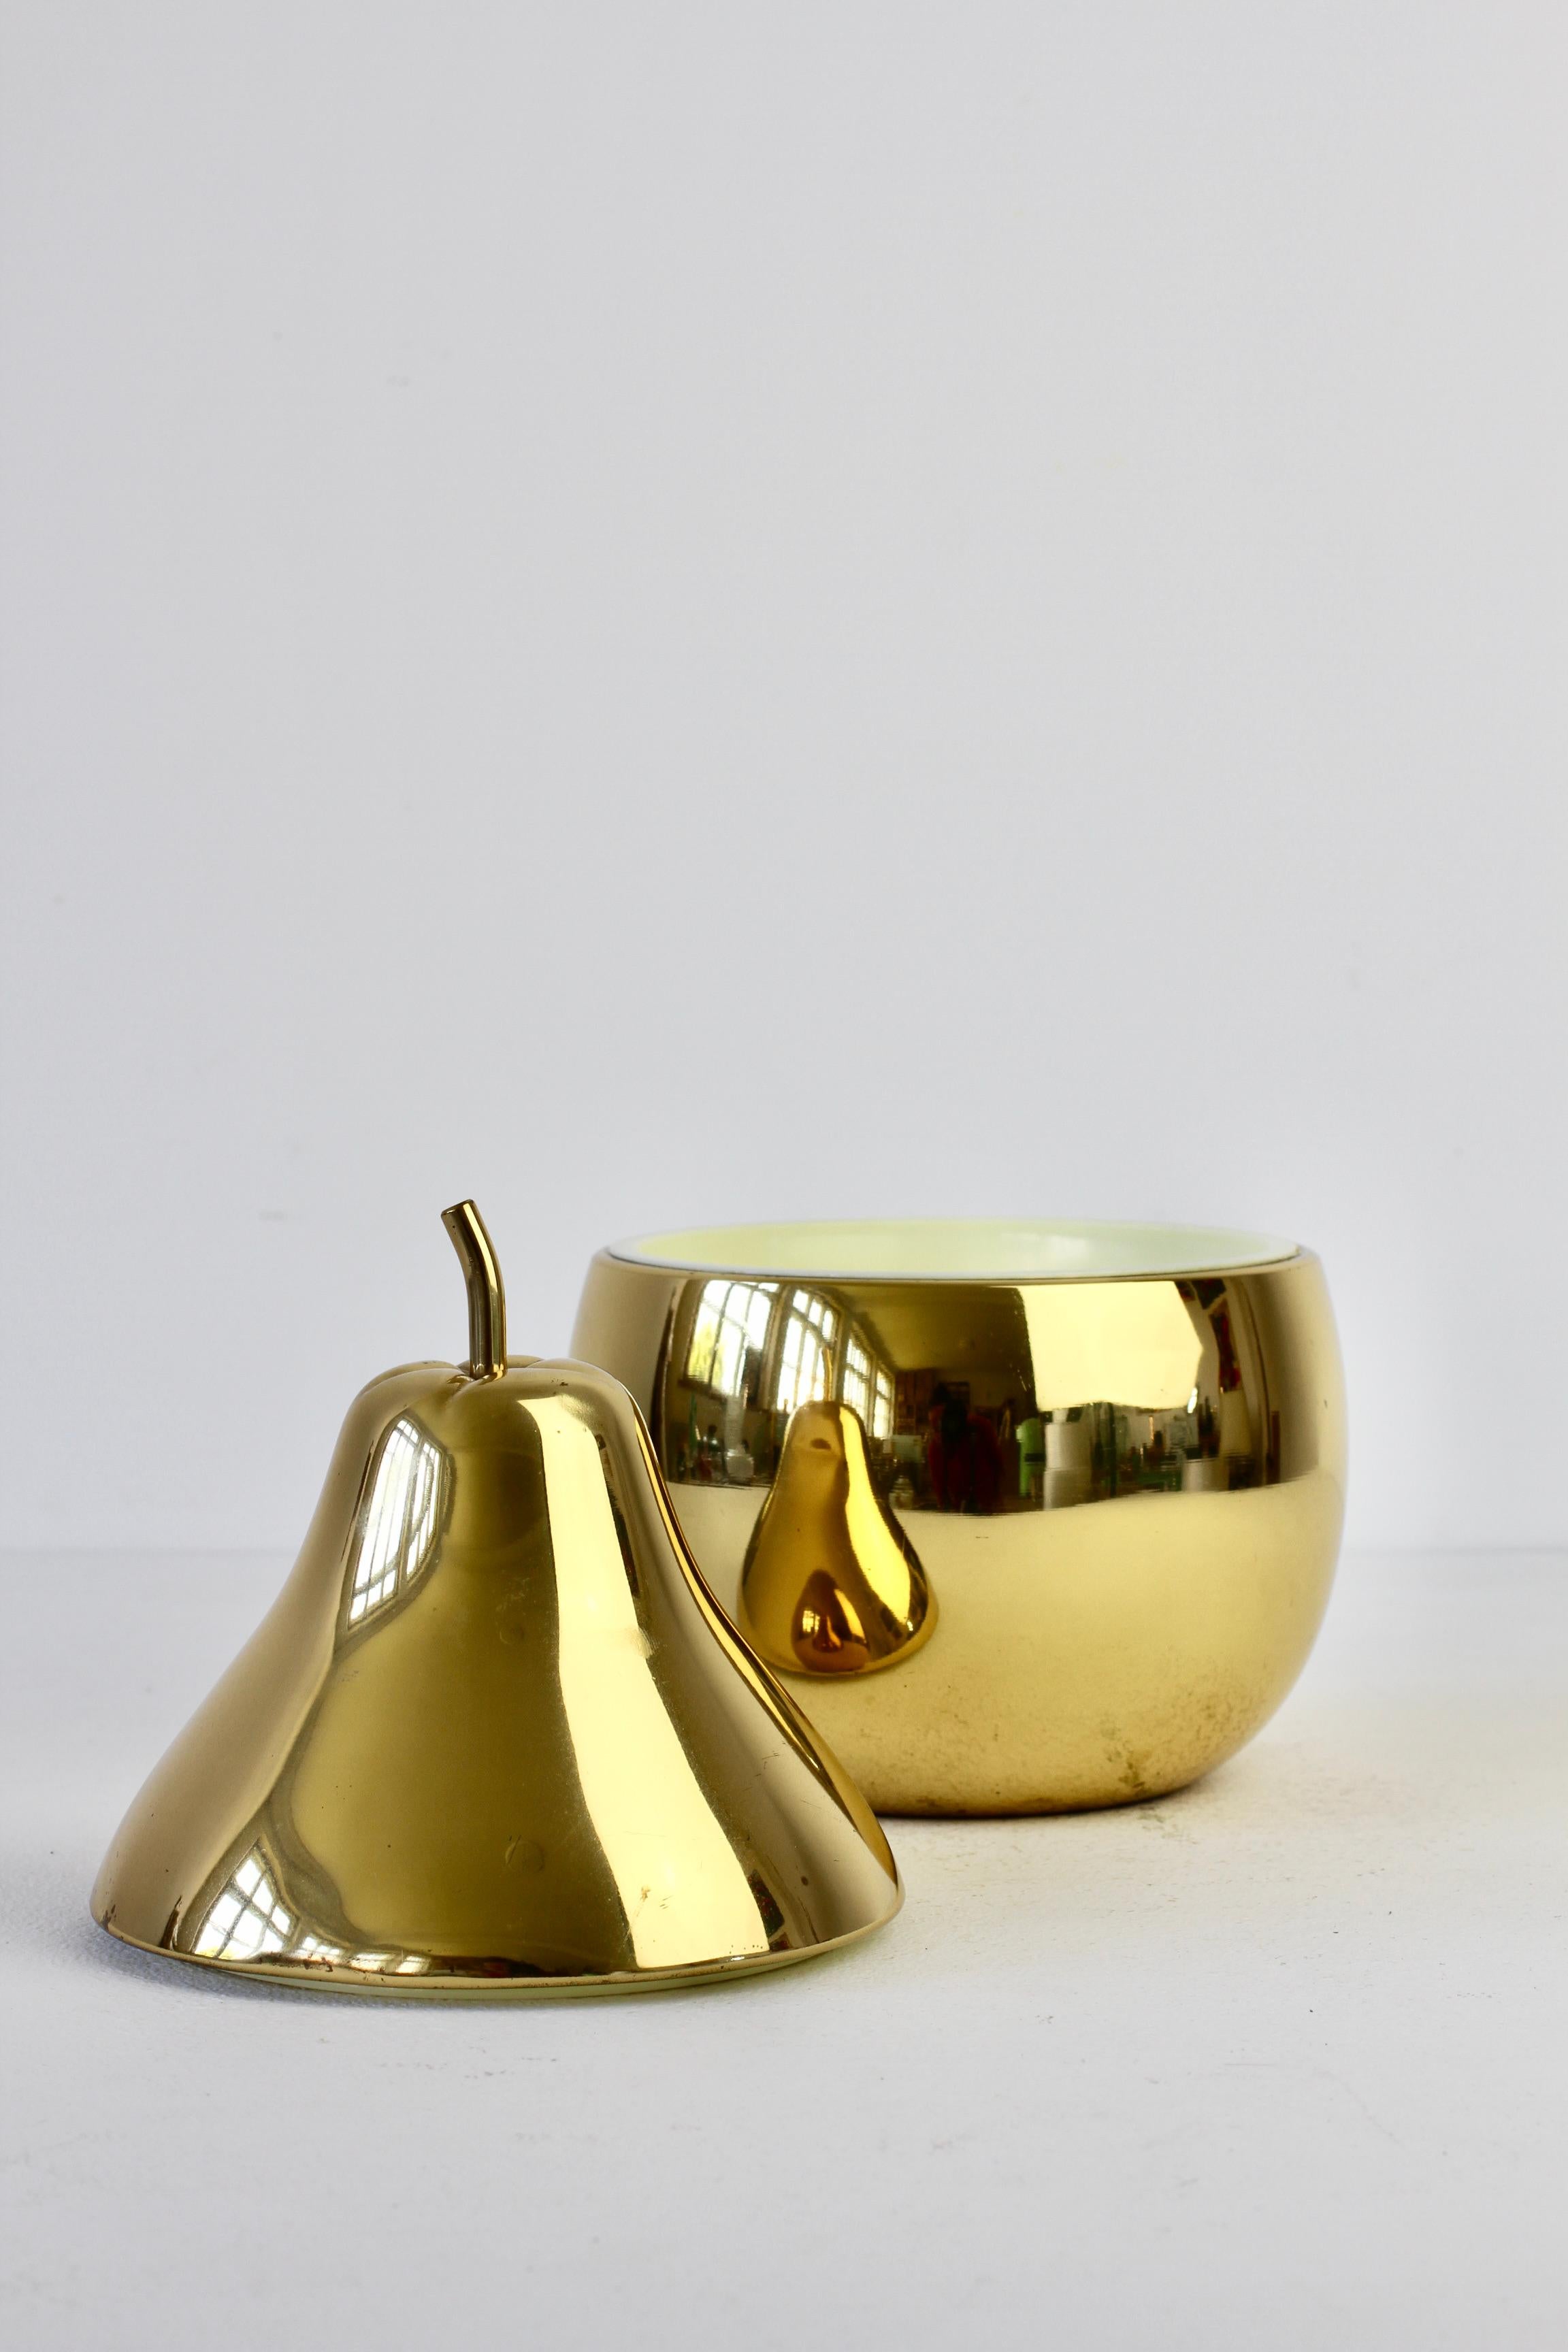 Ettore Sottsass Style Vintage Pear Shaped Brass Ice Cube Bucket or Holder, 1970s For Sale 4